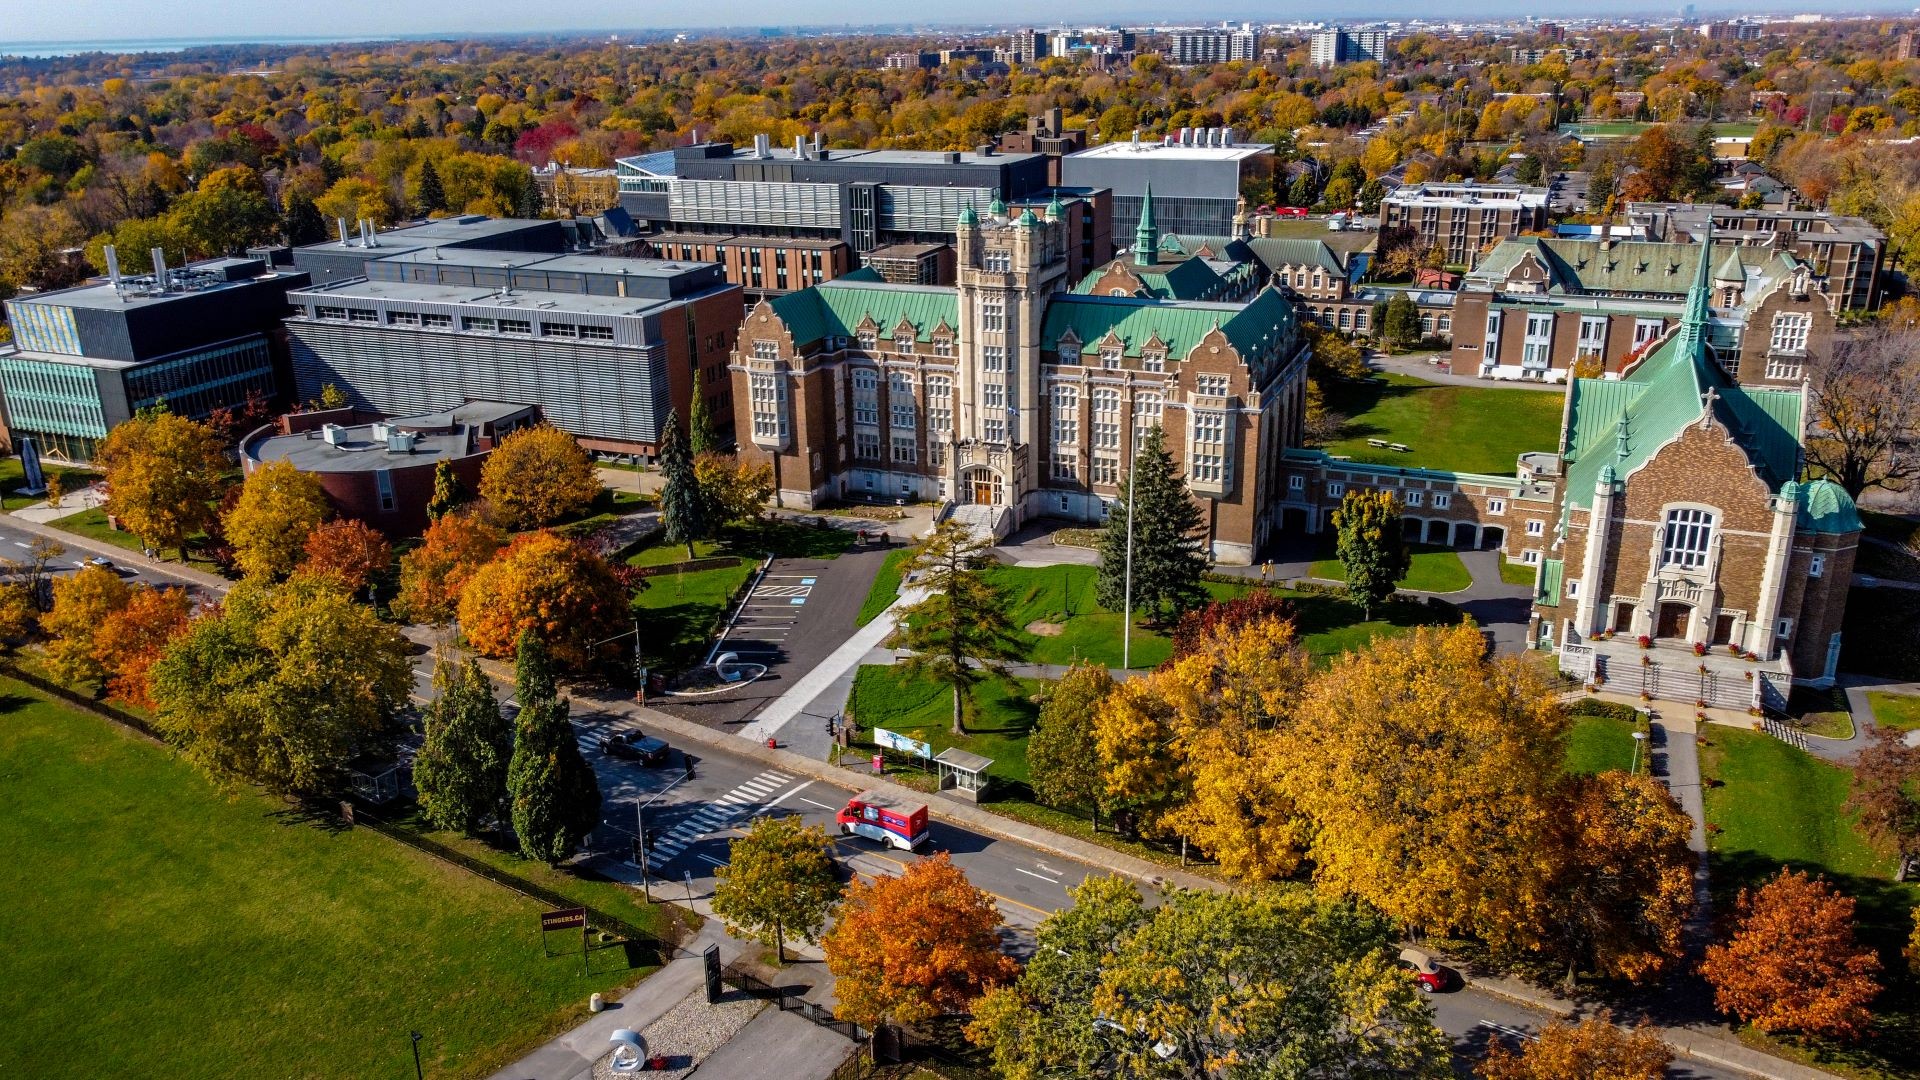 An aerial view of a university campus blending modern and historic buildings amidst autumn foliage.